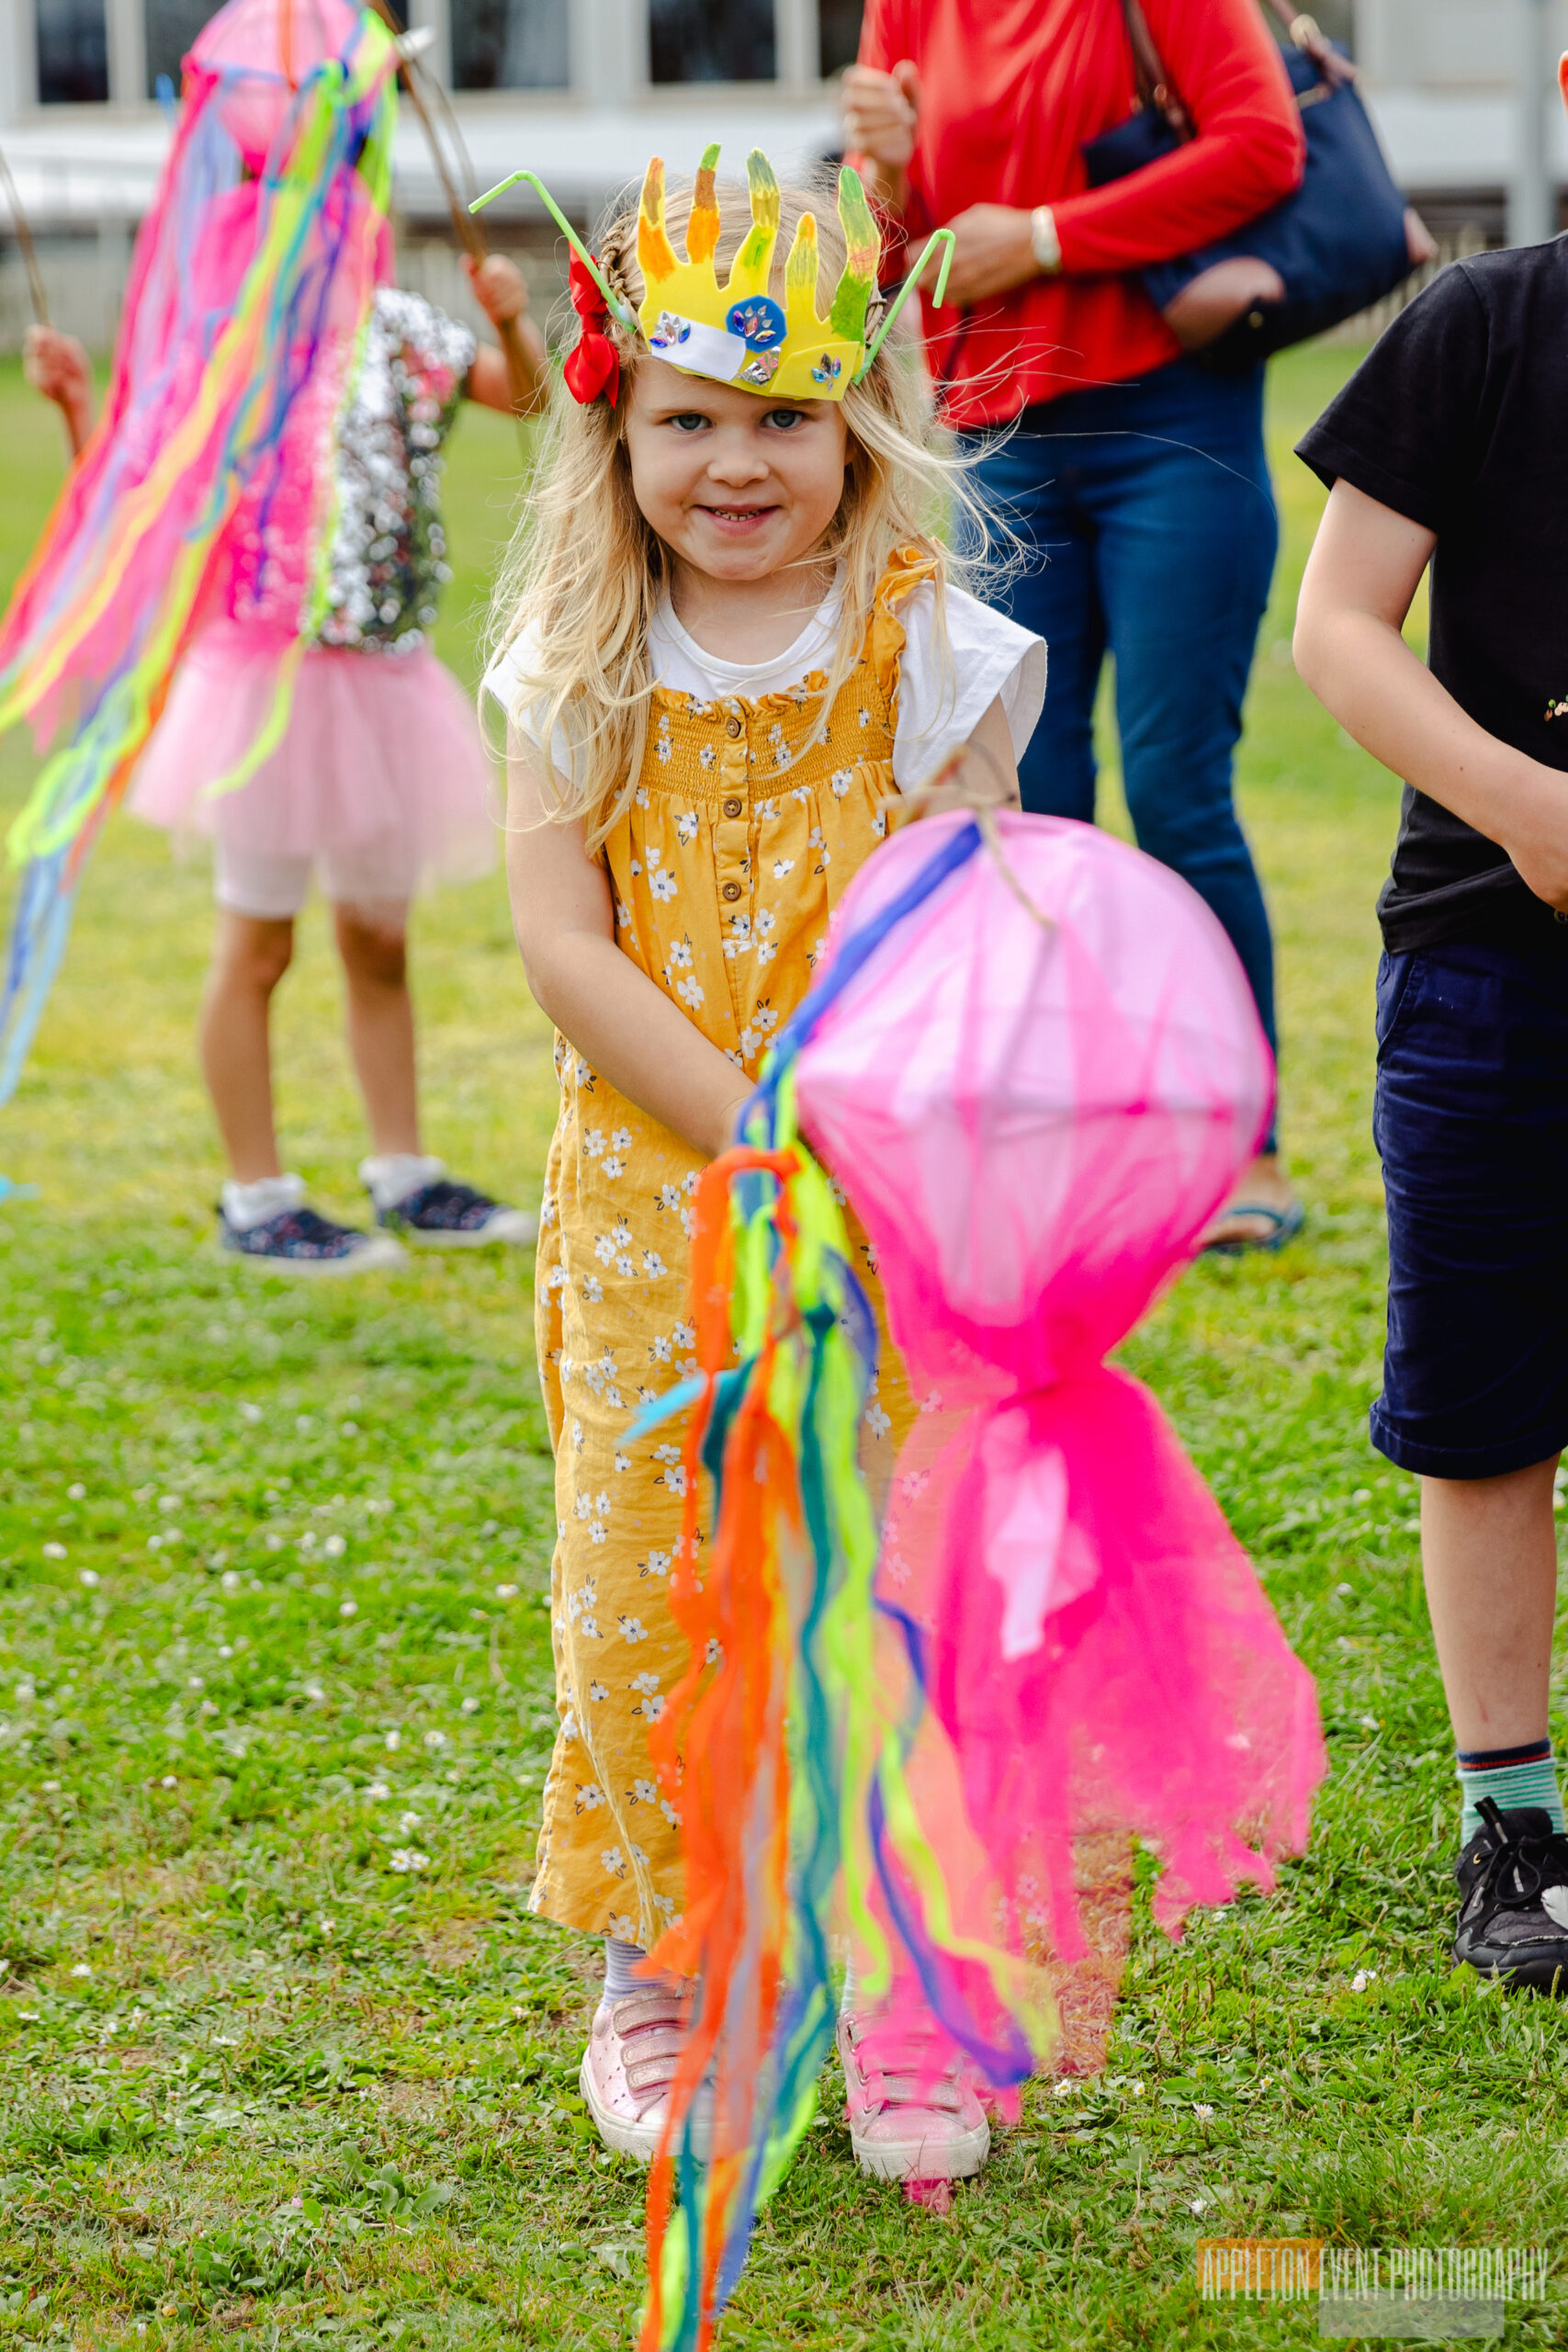 Child posing with her sea creature costume and creations during the Exmouth Festival samba parade